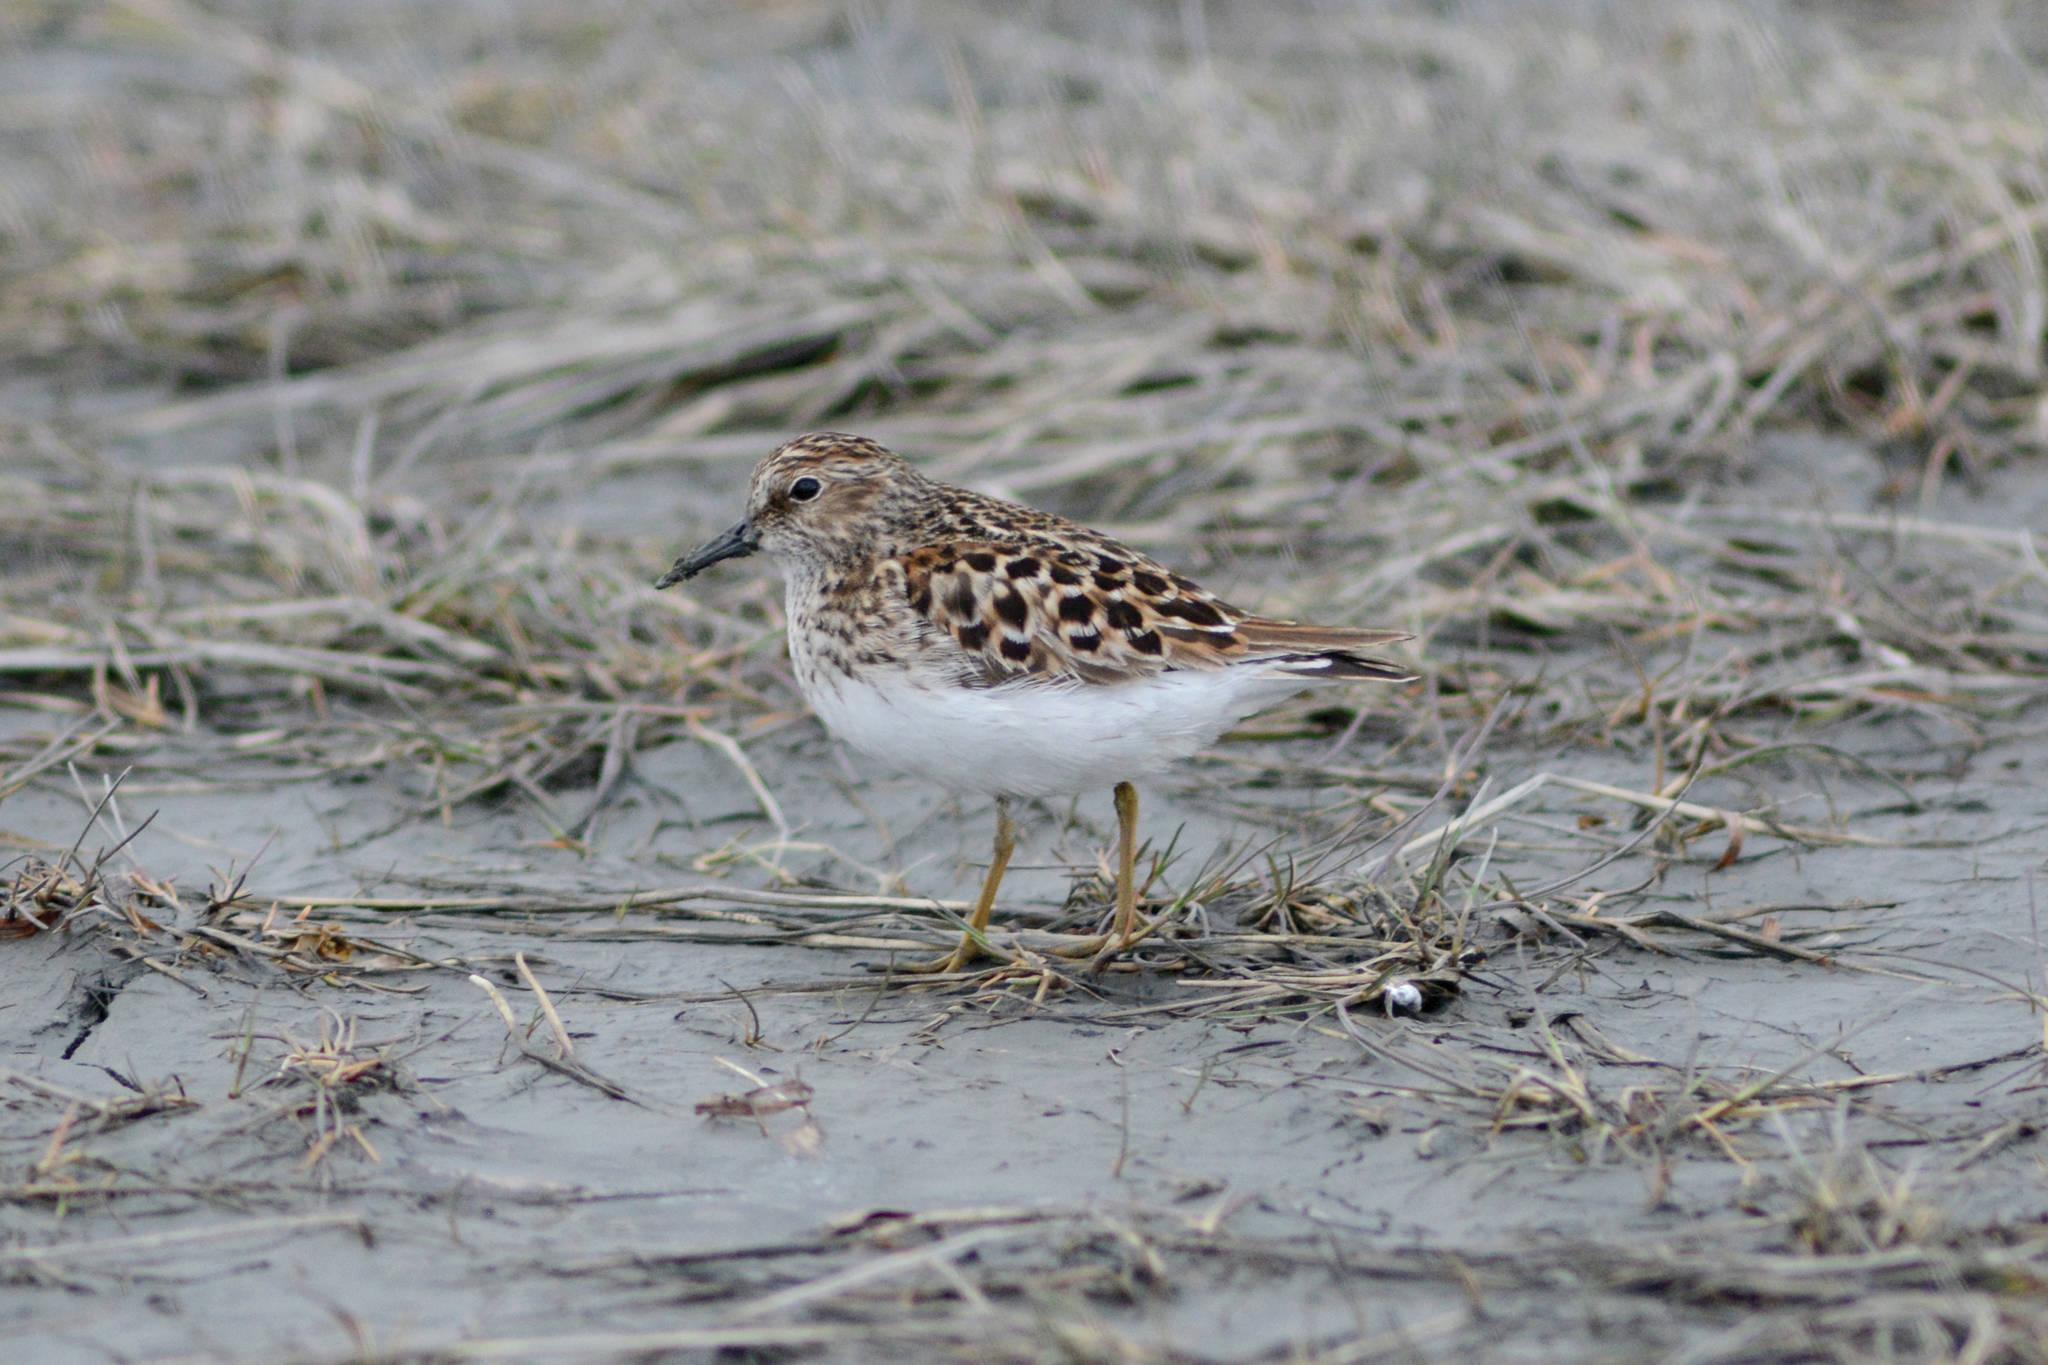 A least sandpiper feeds in Louie’s Lagoon on Saturday, May 9, 2020, on the Homer Spit in Homer, Alaska. (Photo by Michael Armstrong/Homer News)